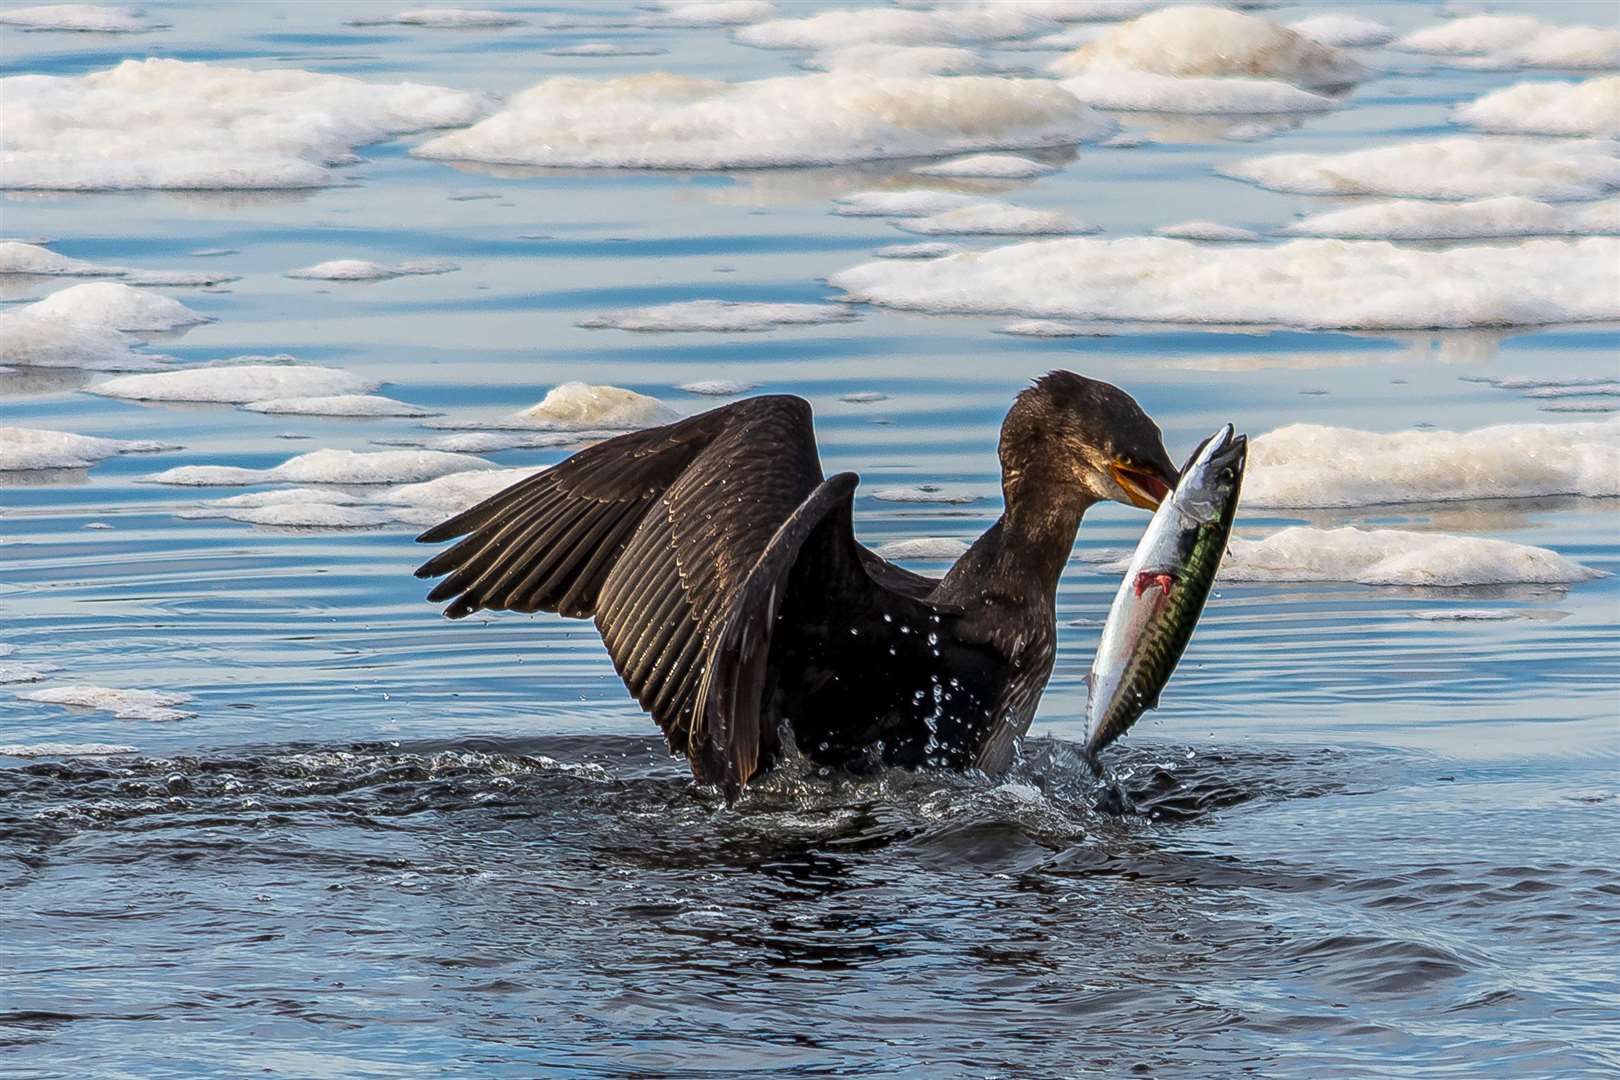 Angus Chisholm won the story category with this photography of a cormorant catchimg its dinner.